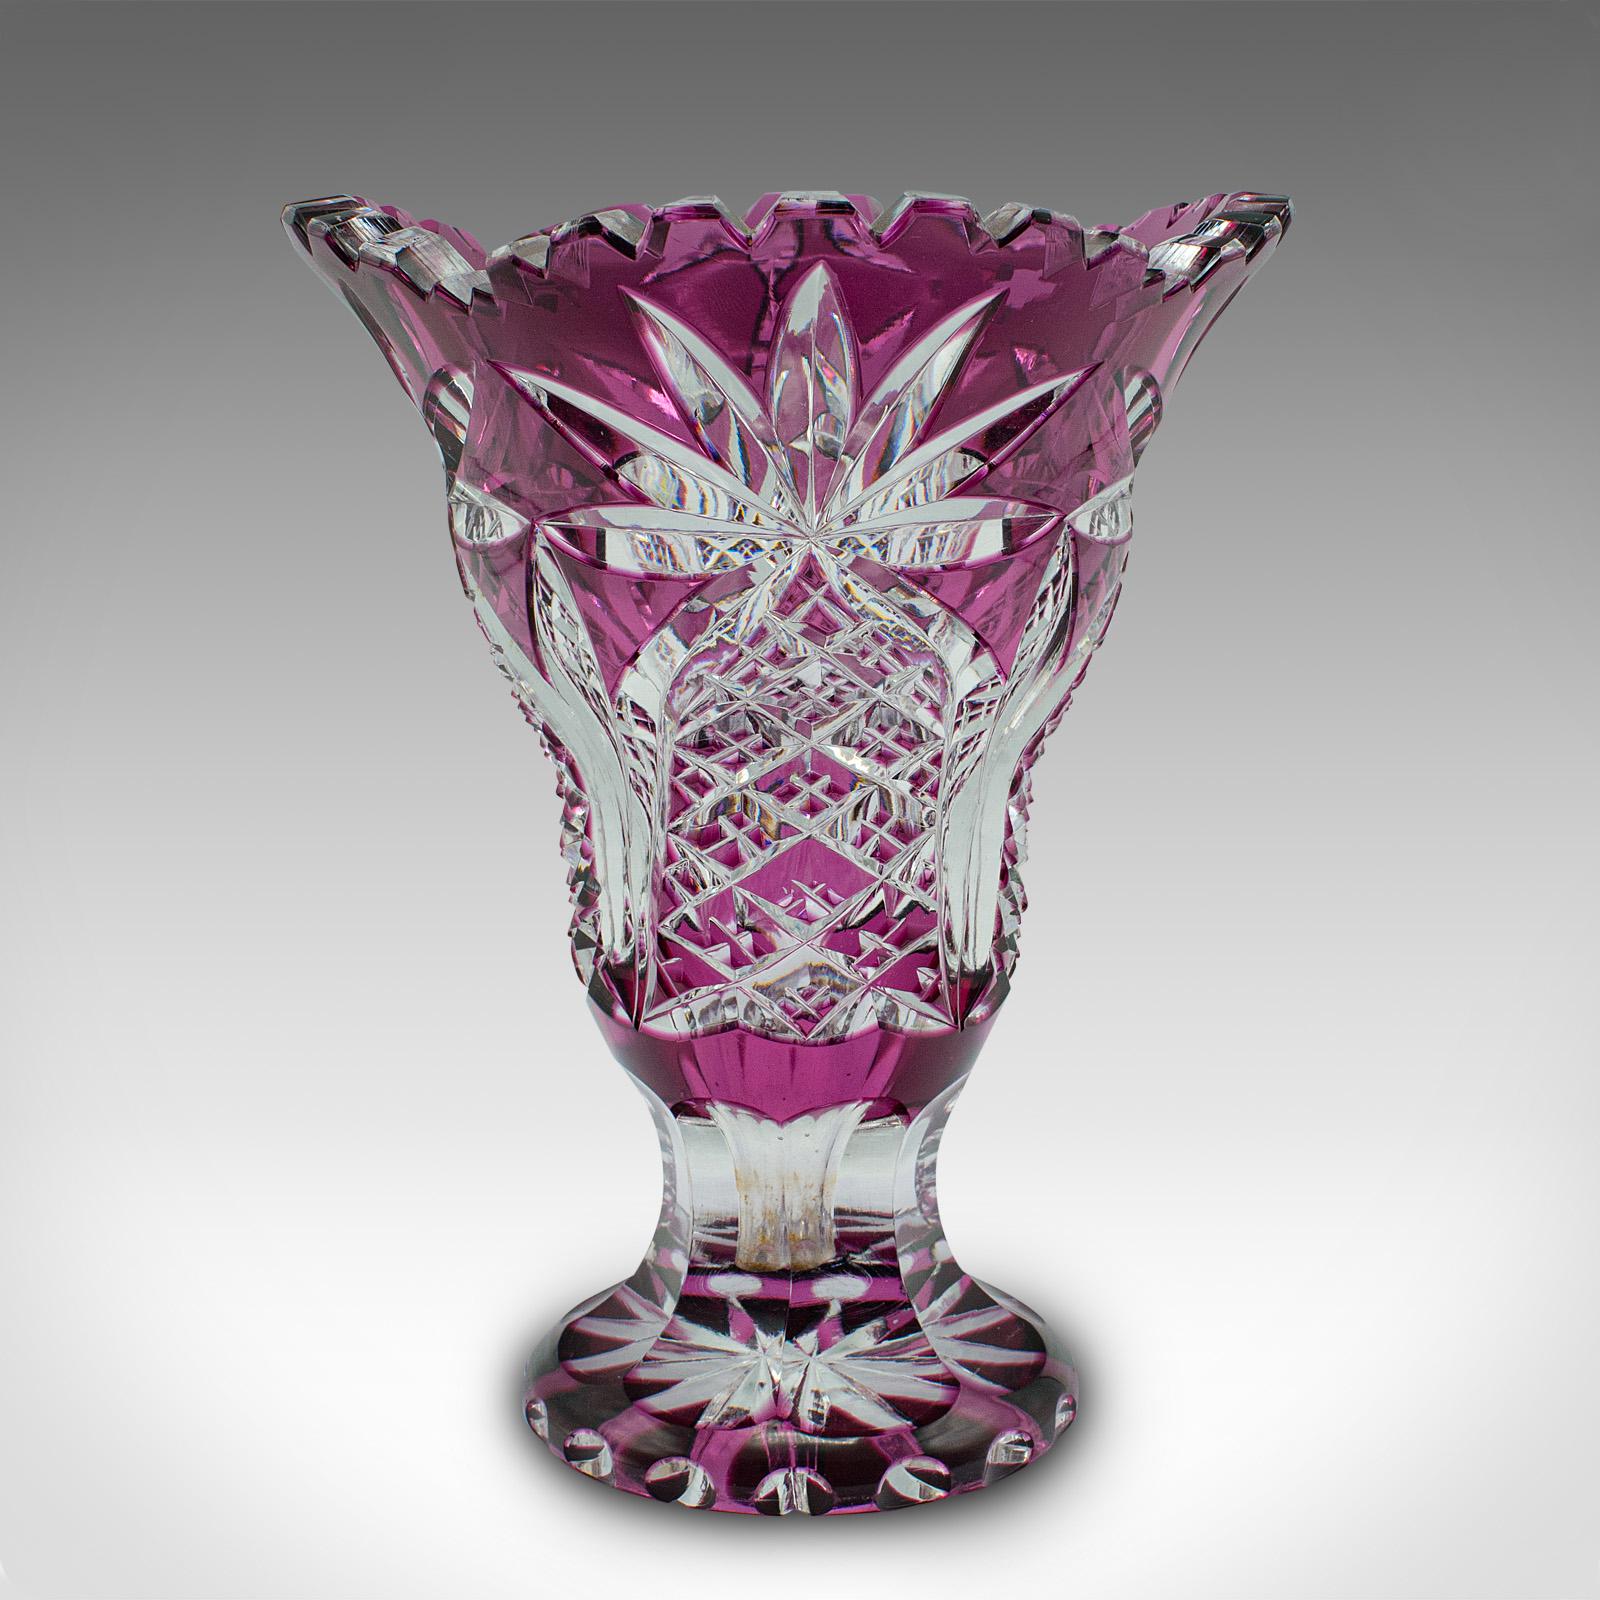 Antique Decorative Vase, English, Cut Glass, Flower Pot, Late Victorian, C.1880 In Good Condition For Sale In Hele, Devon, GB